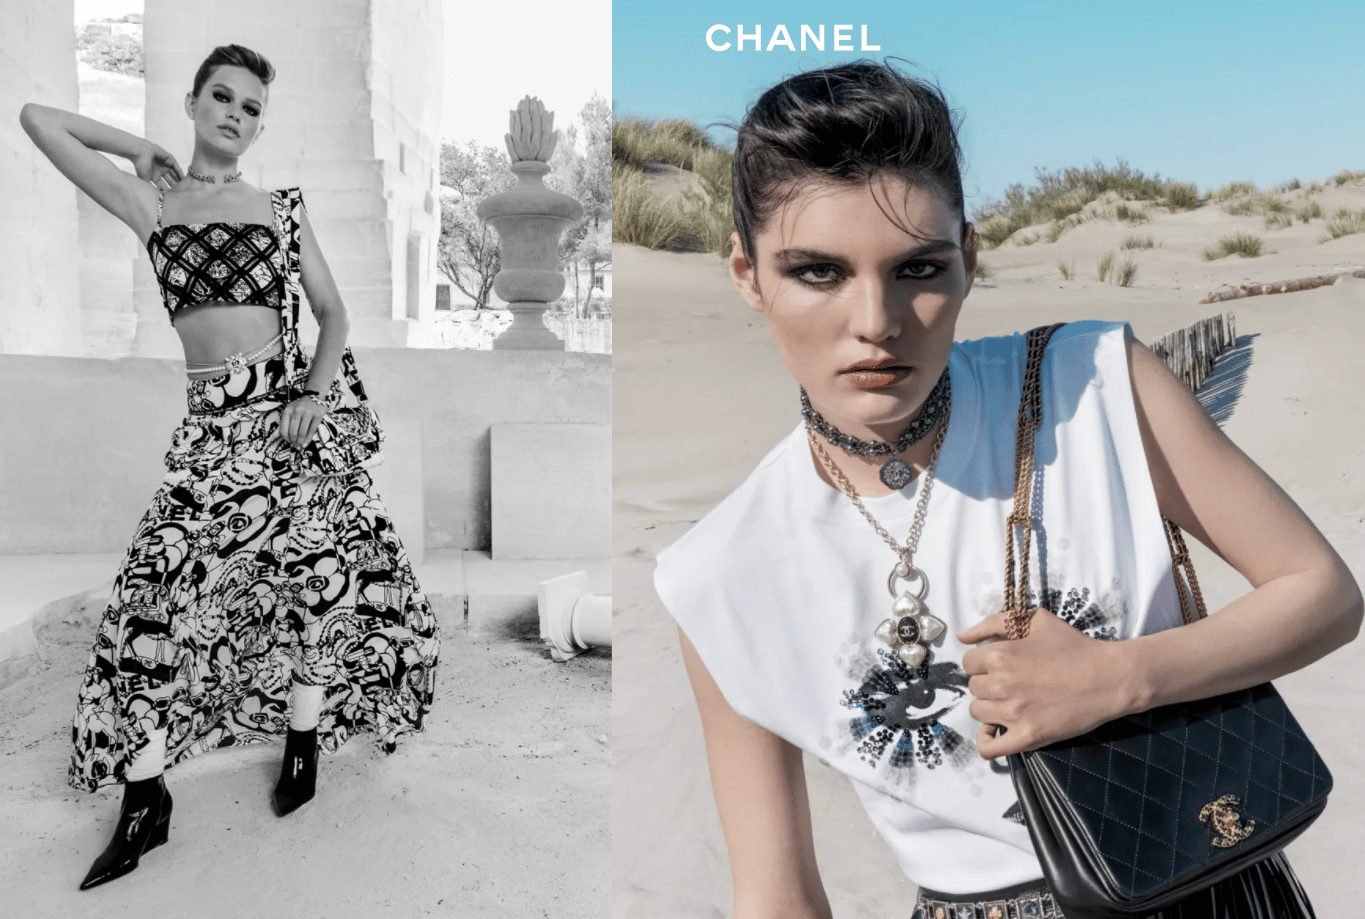 Chanel 23P Spring/Summer 2023 Pre-collection Bags are here